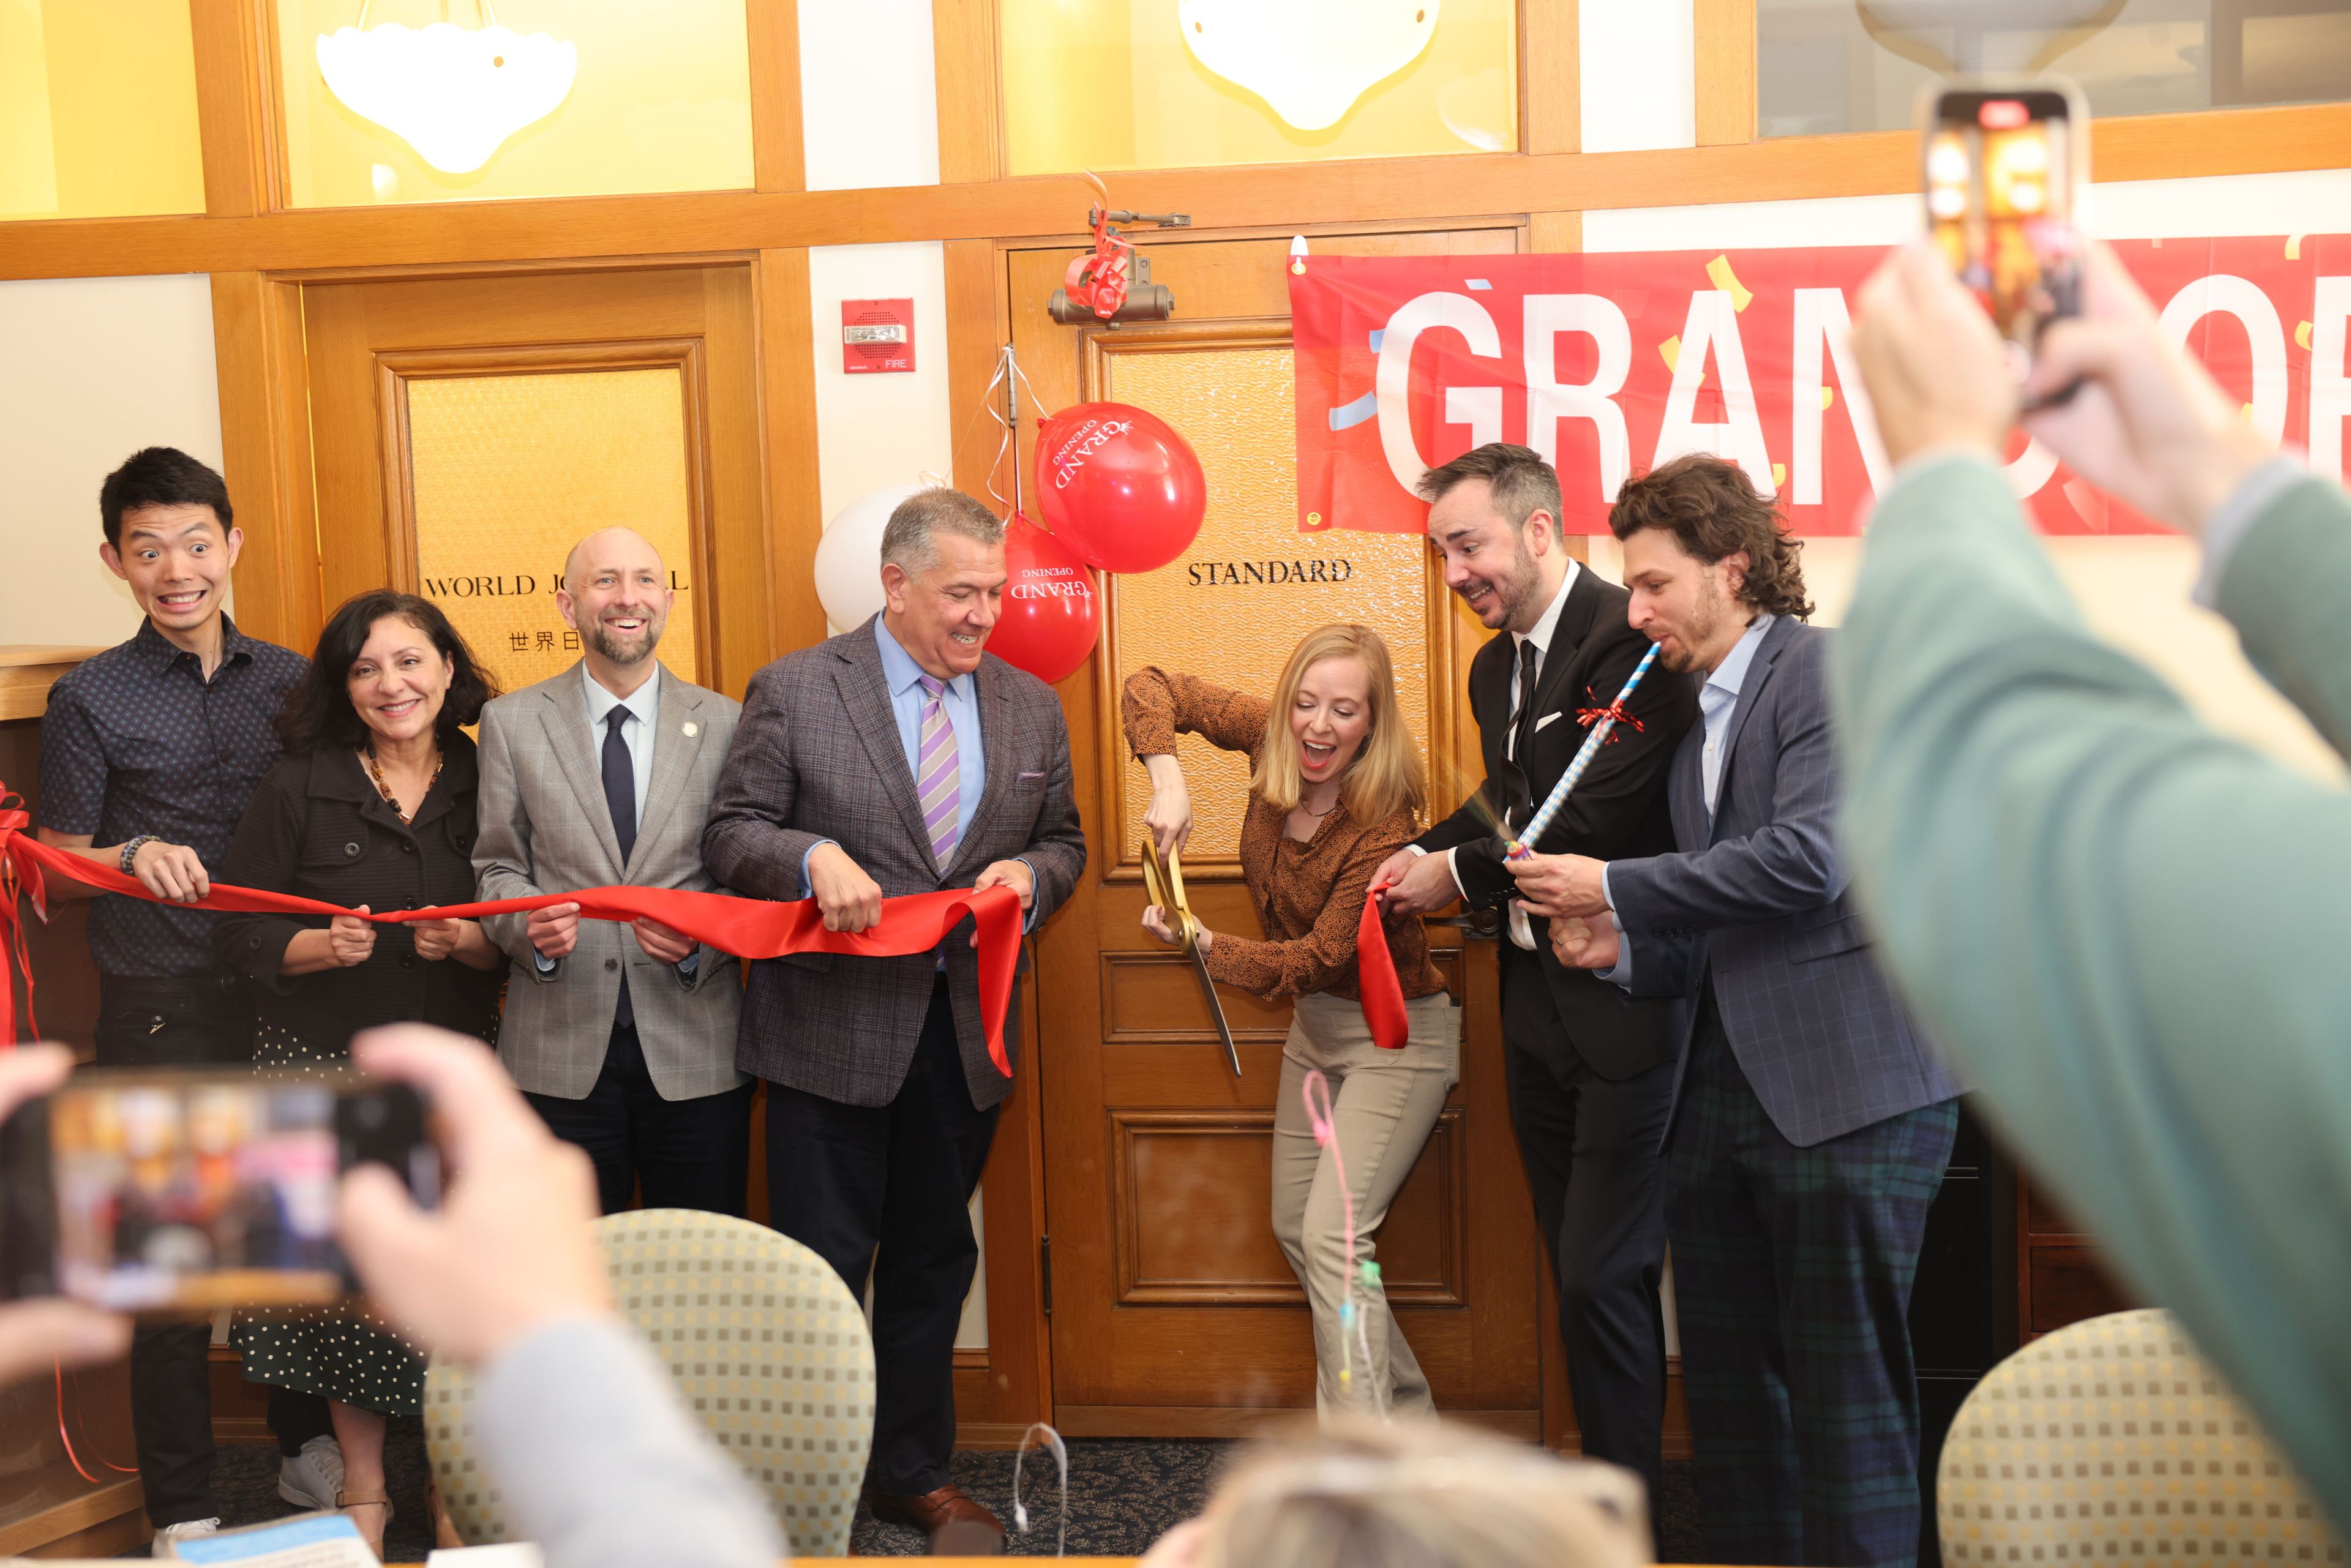 A group is cutting a red ribbon at a grand opening event, smiling and posing for photos.